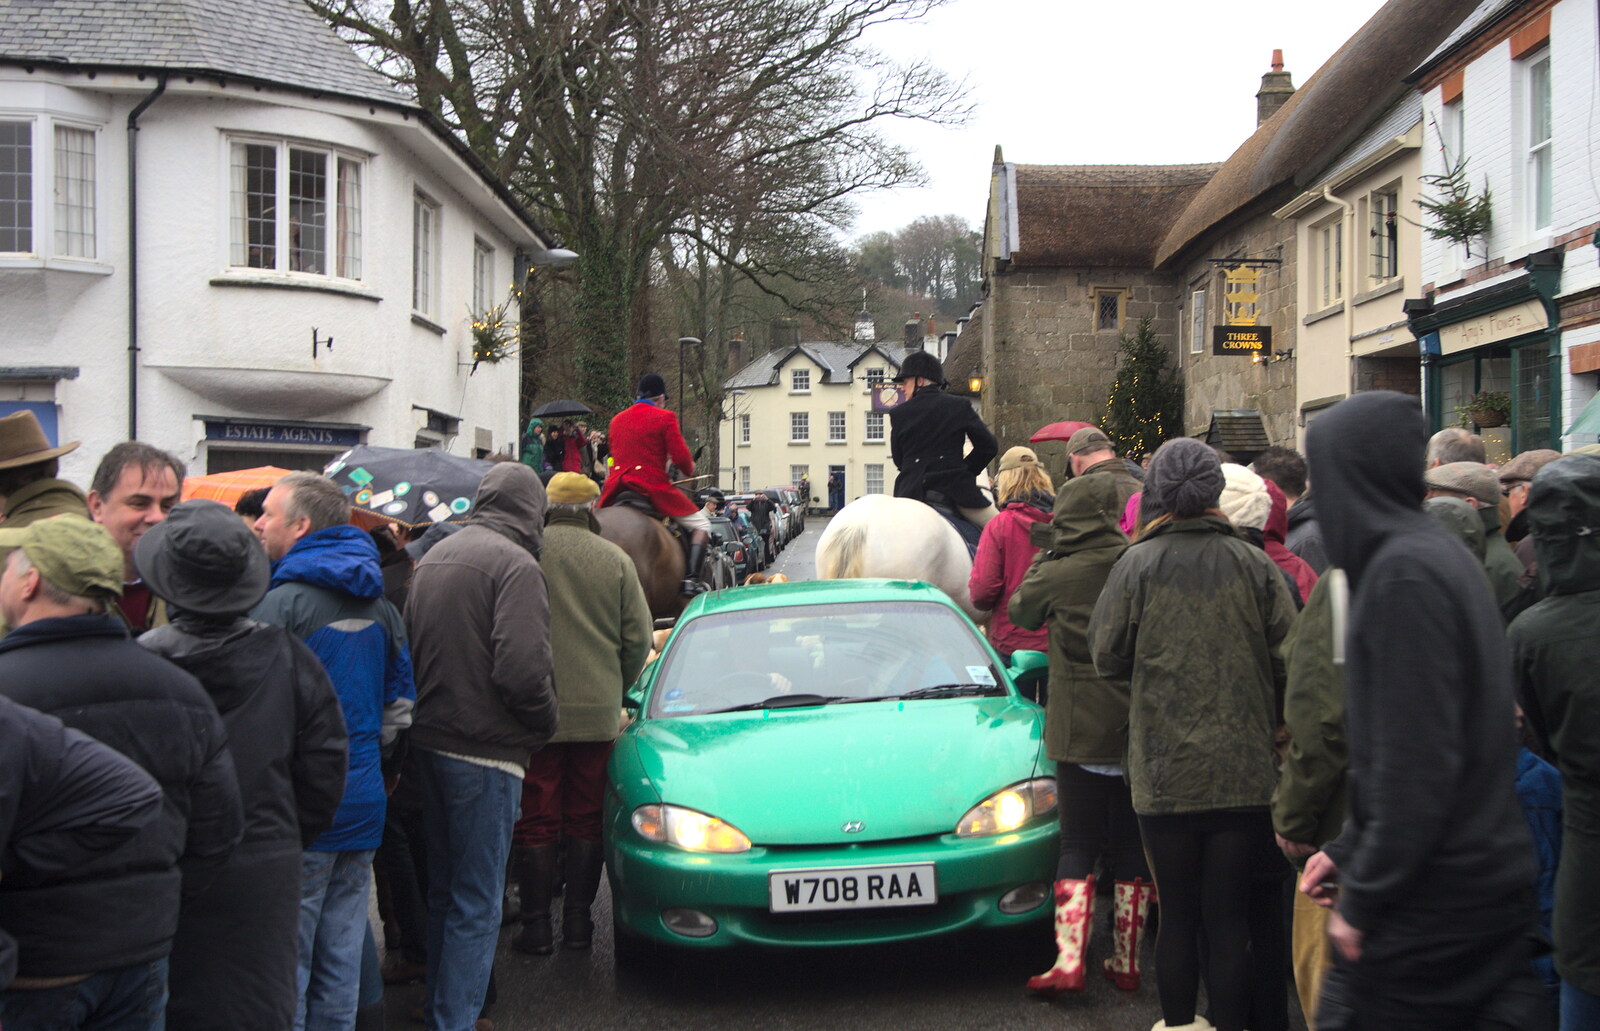 A car squeezes through the crowd on Mill Street from The Boxing Day Hunt, Chagford, Devon - 26th December 2012